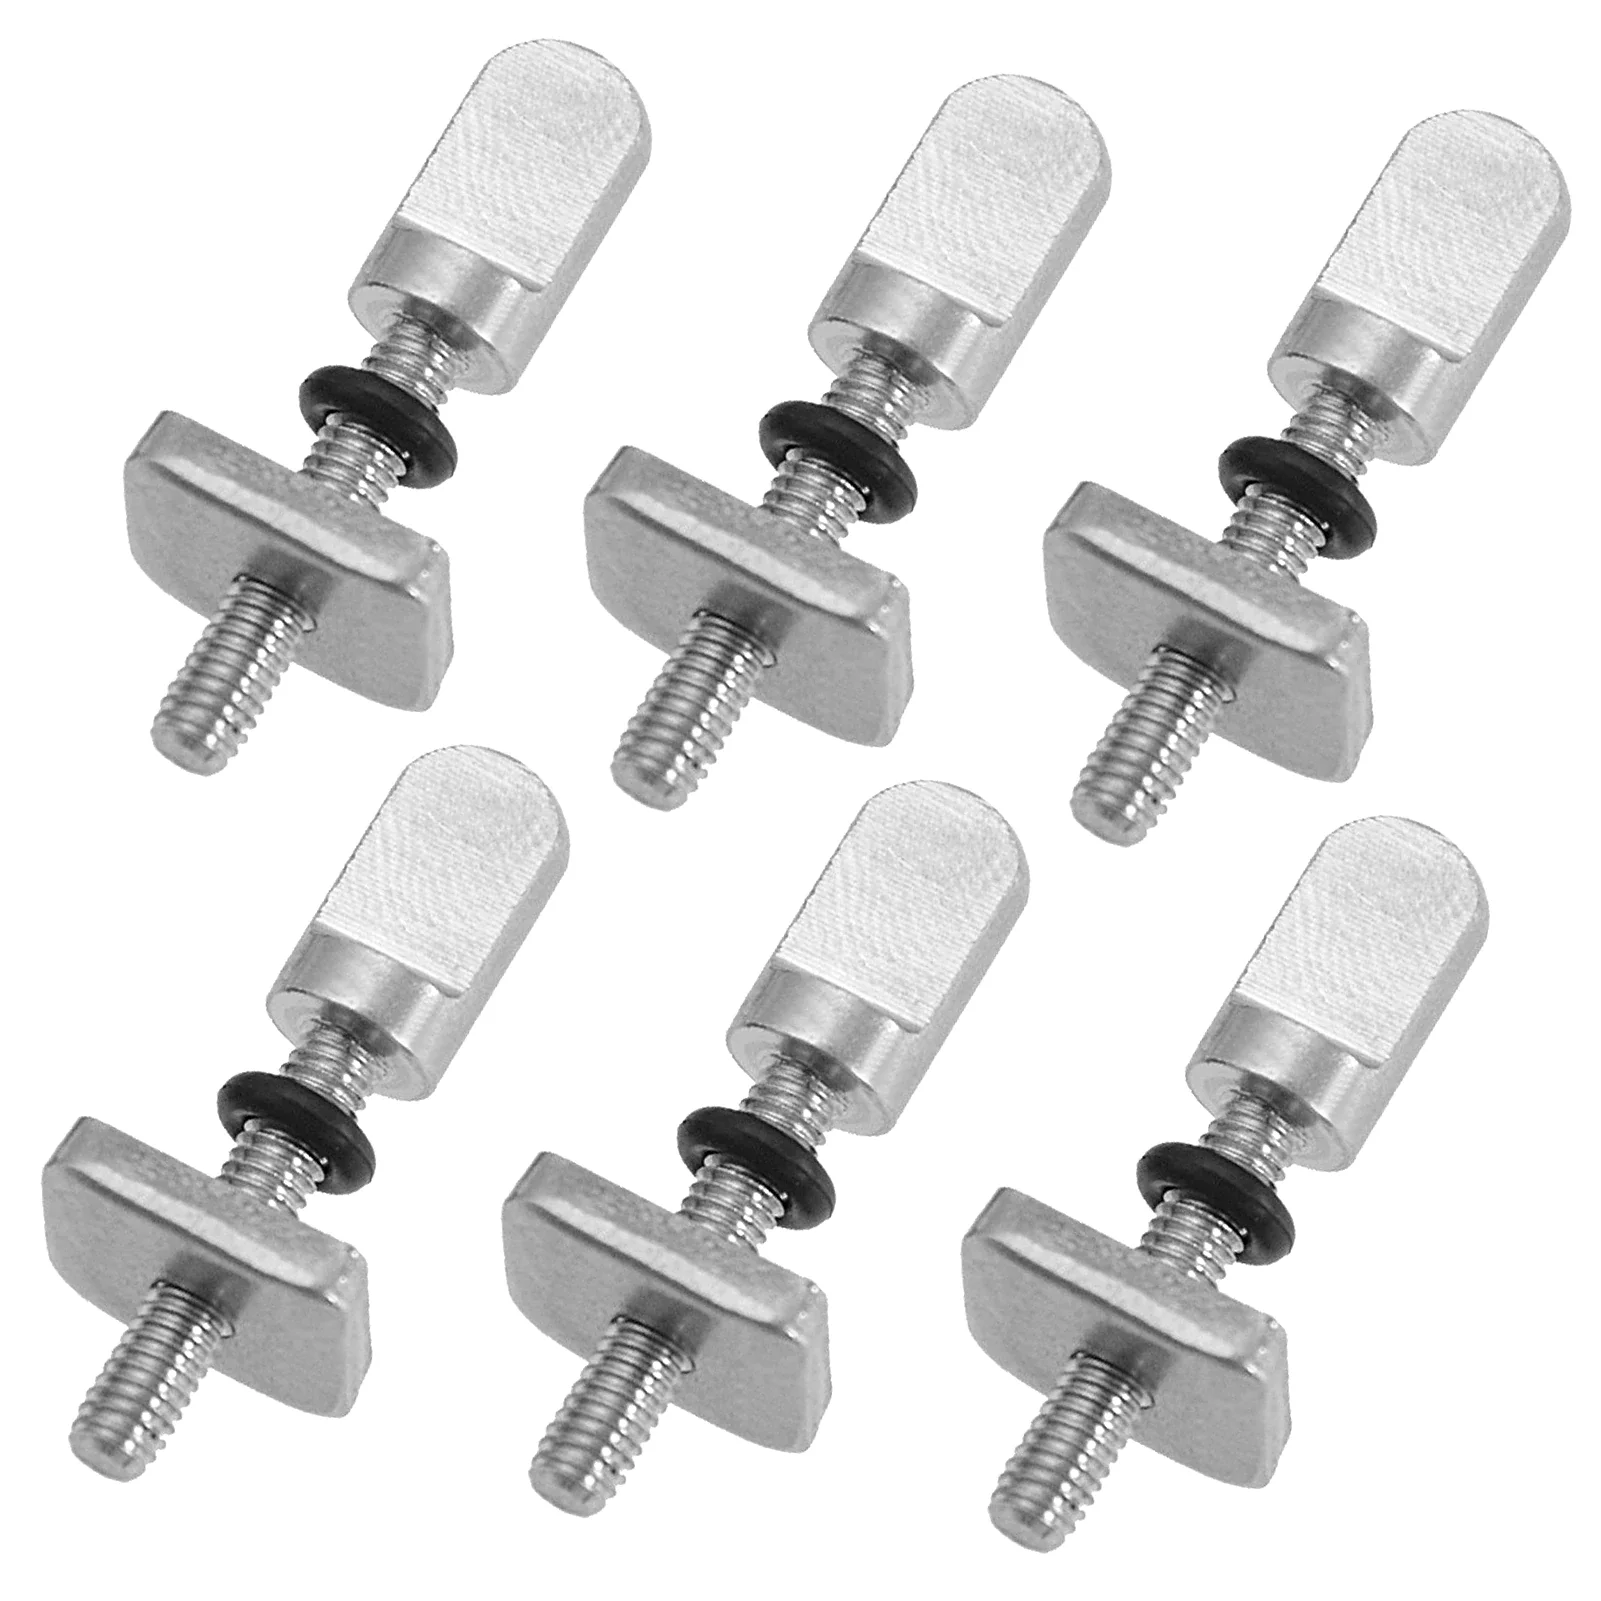 3pcs/6pcs Stainless Steel Surfboard Fin Screw M4 Surf Fin Bolts Longboard Sliding Fin Screws Single Fin Nails Replacing Screws 100 200pcs invisible security screws self tapping screws foot line security nail specific sleeve tool baseboard seamless nails